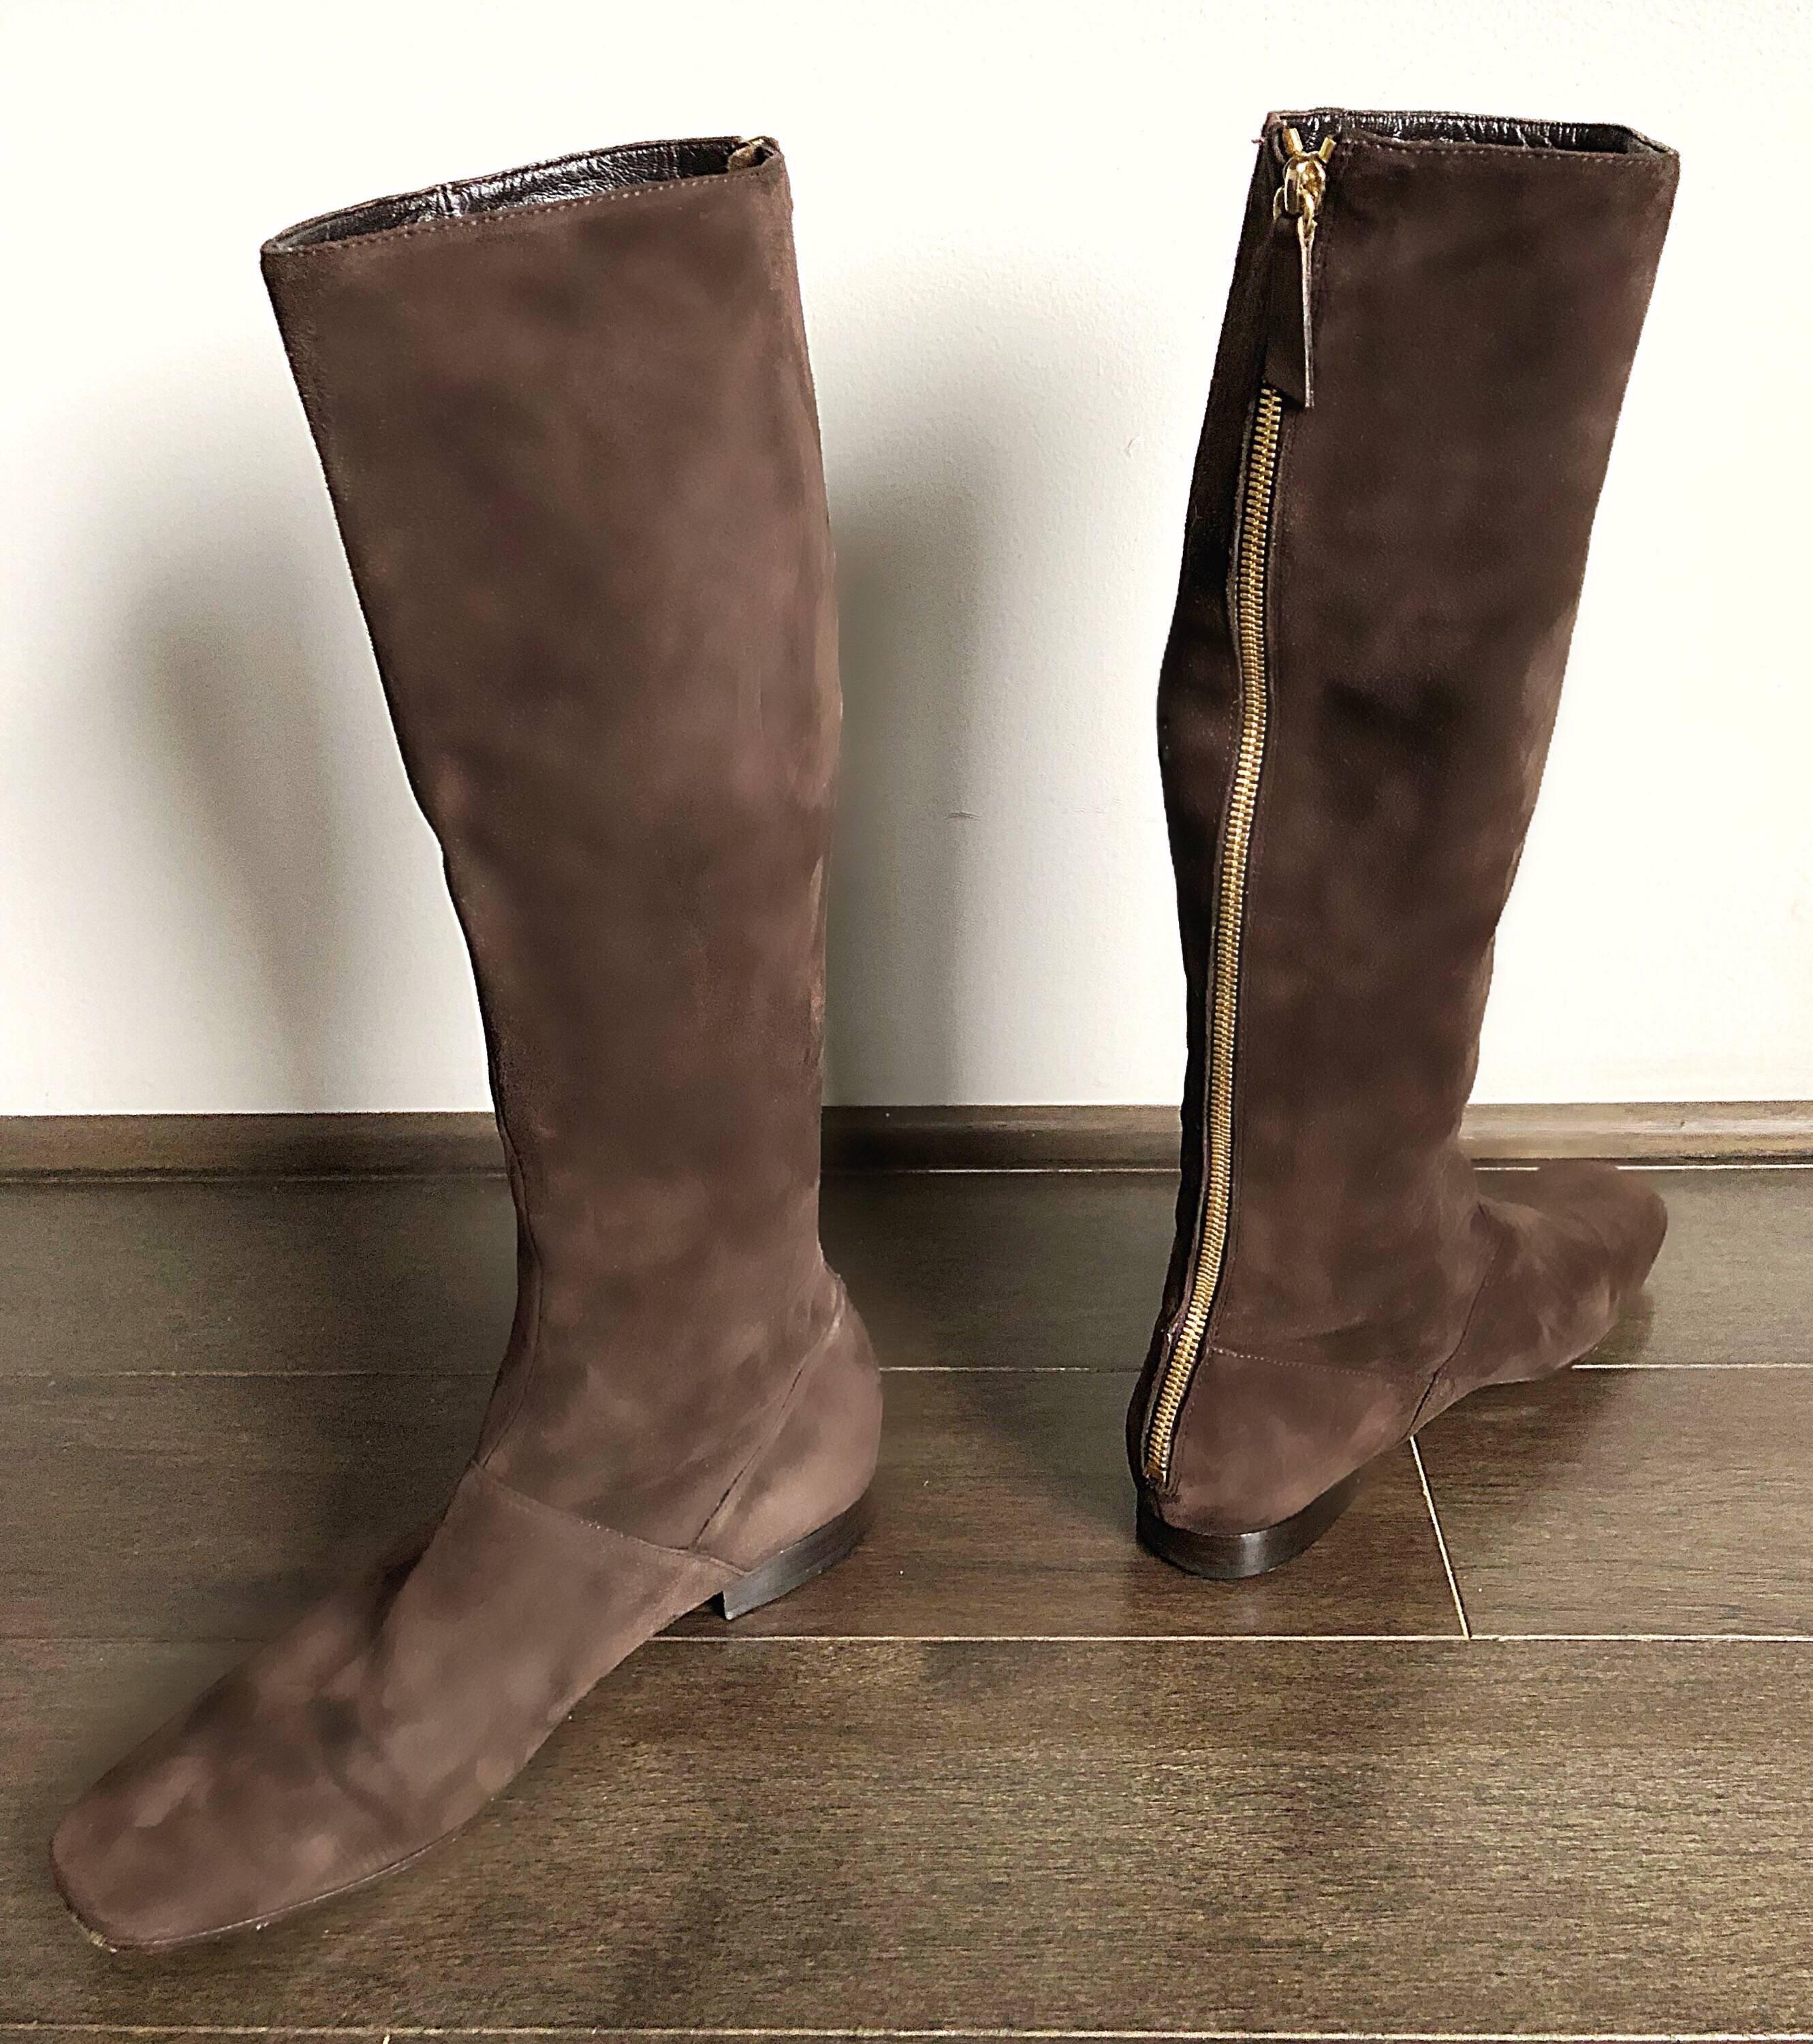 Never worn vintage 1990s MOSCHINO CHEAP and CHIC chocolate brown suede leather knee high flat boots! Effortlessly chic, with a sleek toe, and an exposed gold zipper down the back. Super comfortable, and very easy to dress up or down. Great tucked